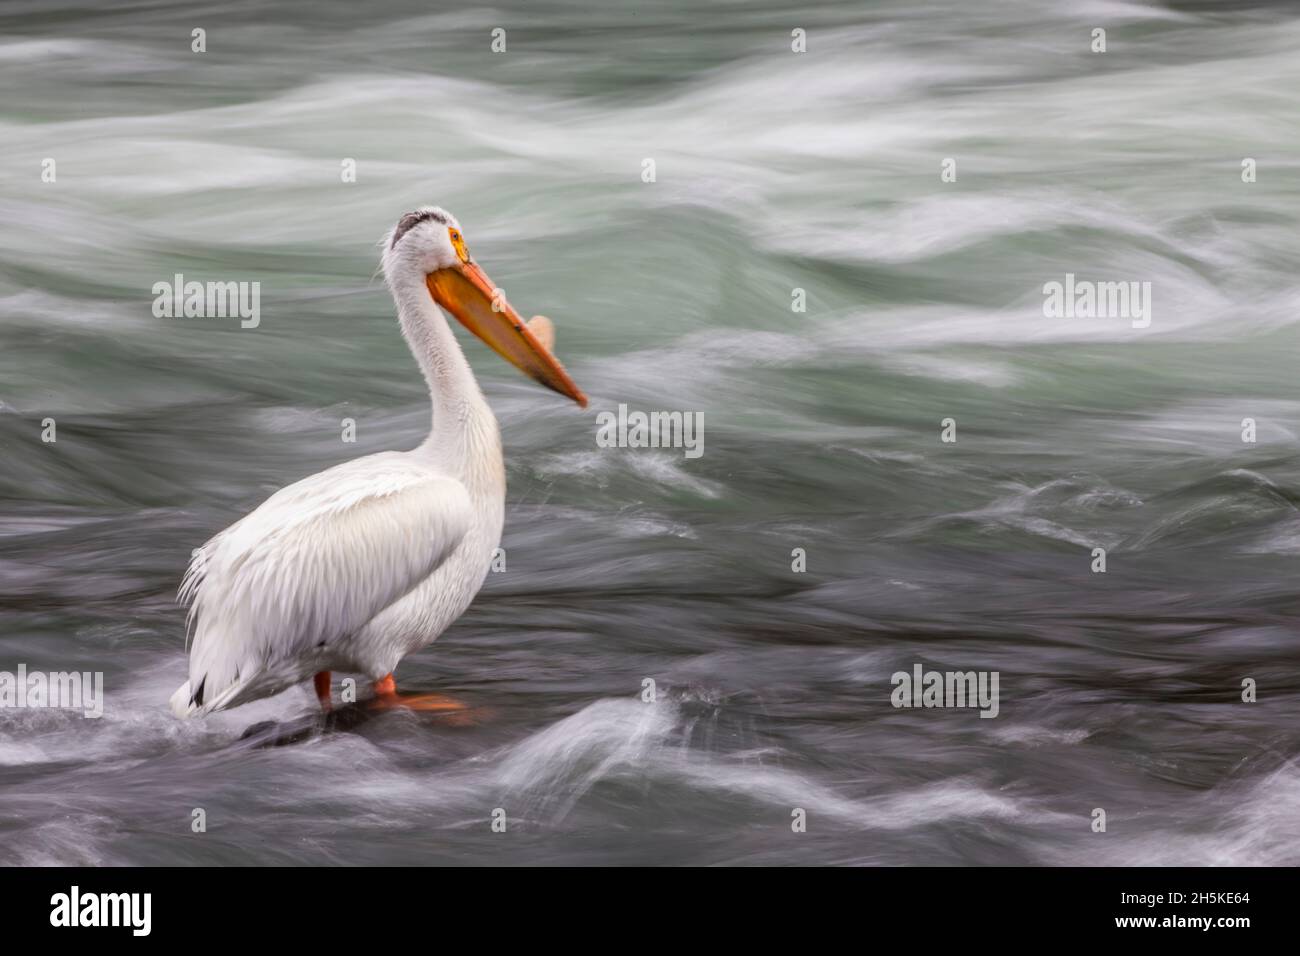 Portrait of an American white pelican (Pelecanus erythrorhynchos) displaying a  bill horn on its beak during breeding season and standing on rocks ... Stock Photo